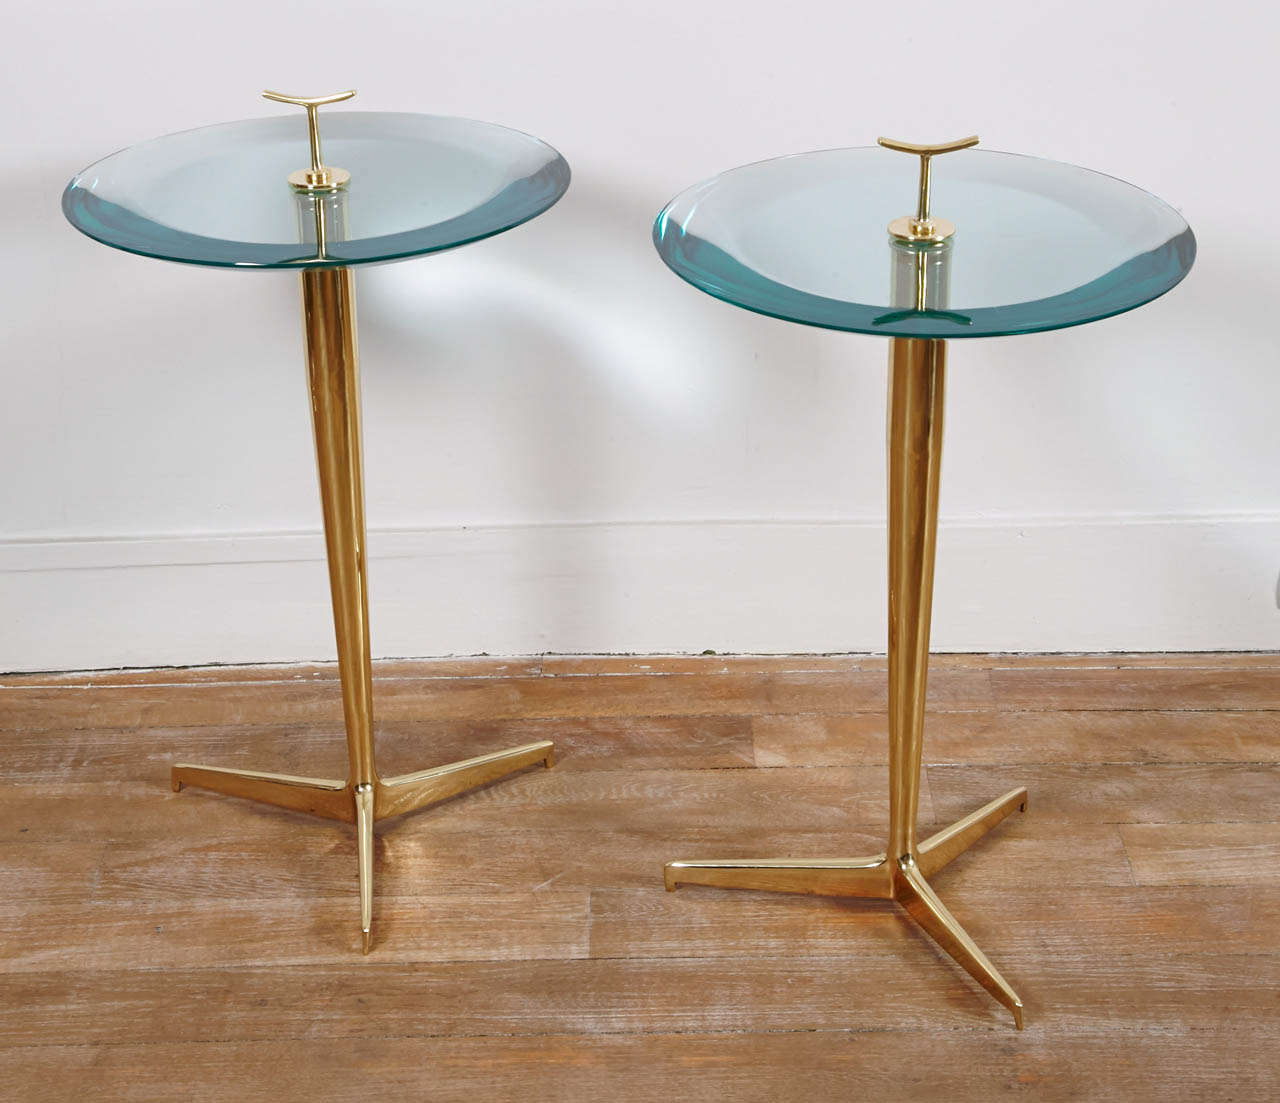 Elegant pair of side tables by Poggi
Brass and thick lens effect glass
Italy, 1990's 
Height including the handle : 64 cm
Tray Height : 58 cm